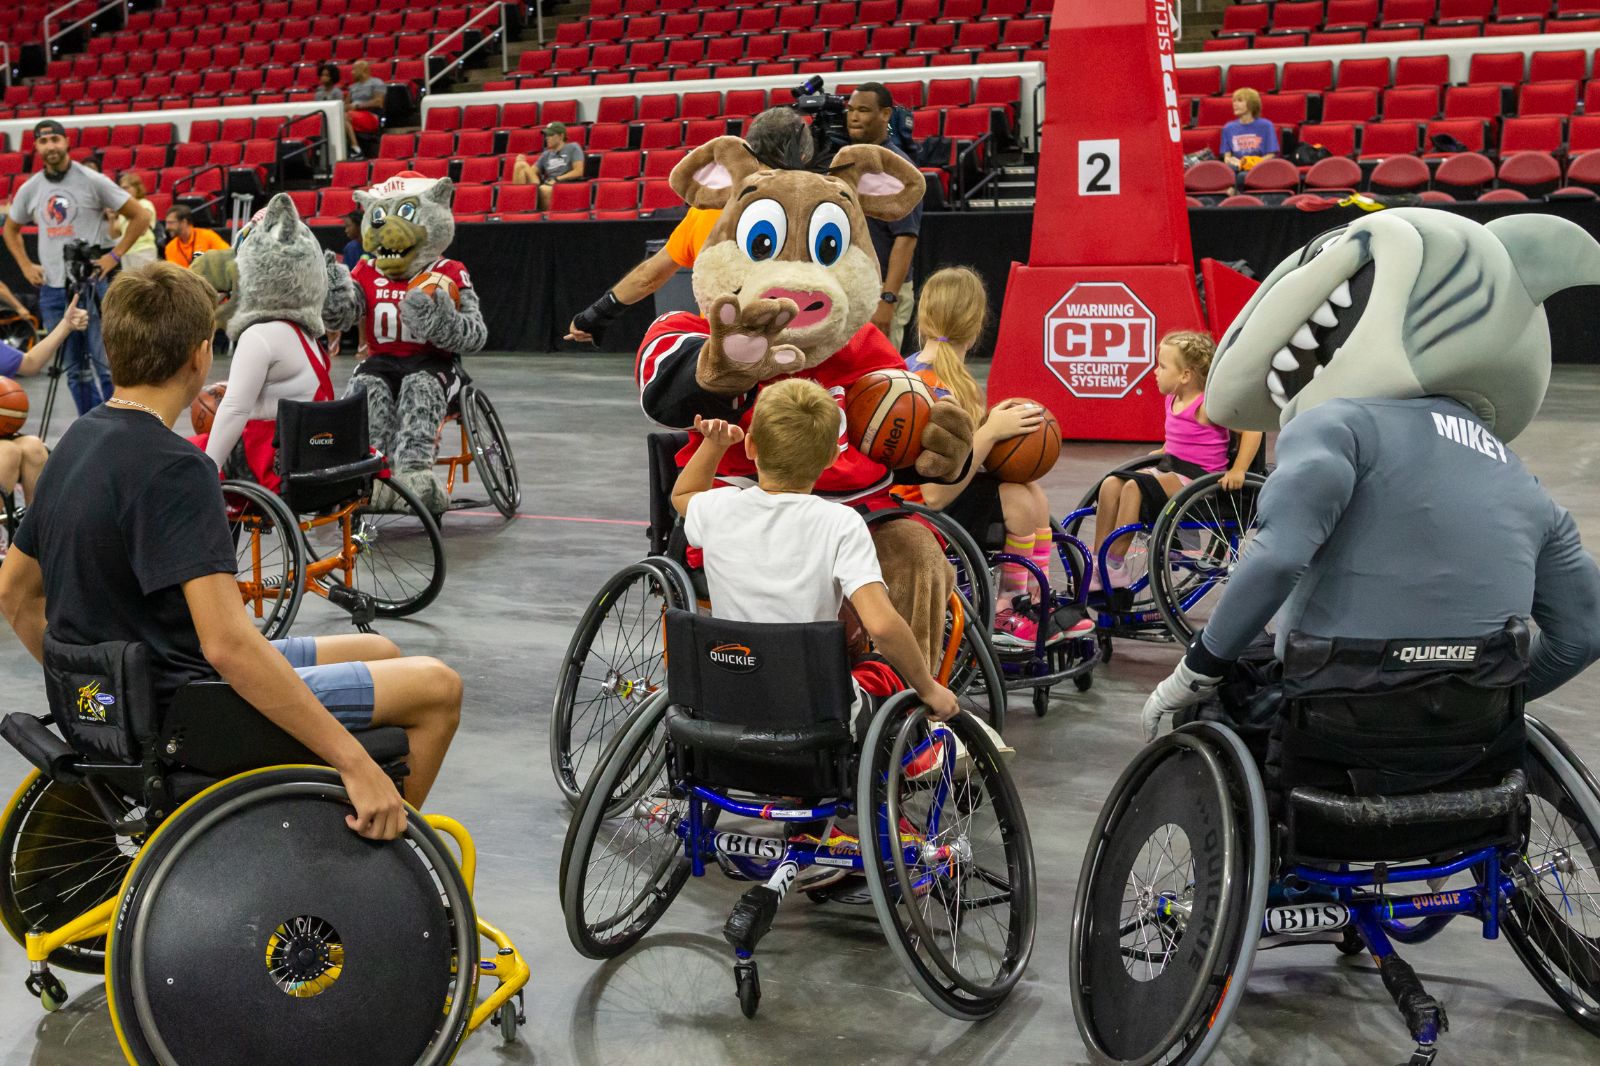 A group of young players in sports chairs interacting with other people, dressed as sports' mascots, also in sports chairs.